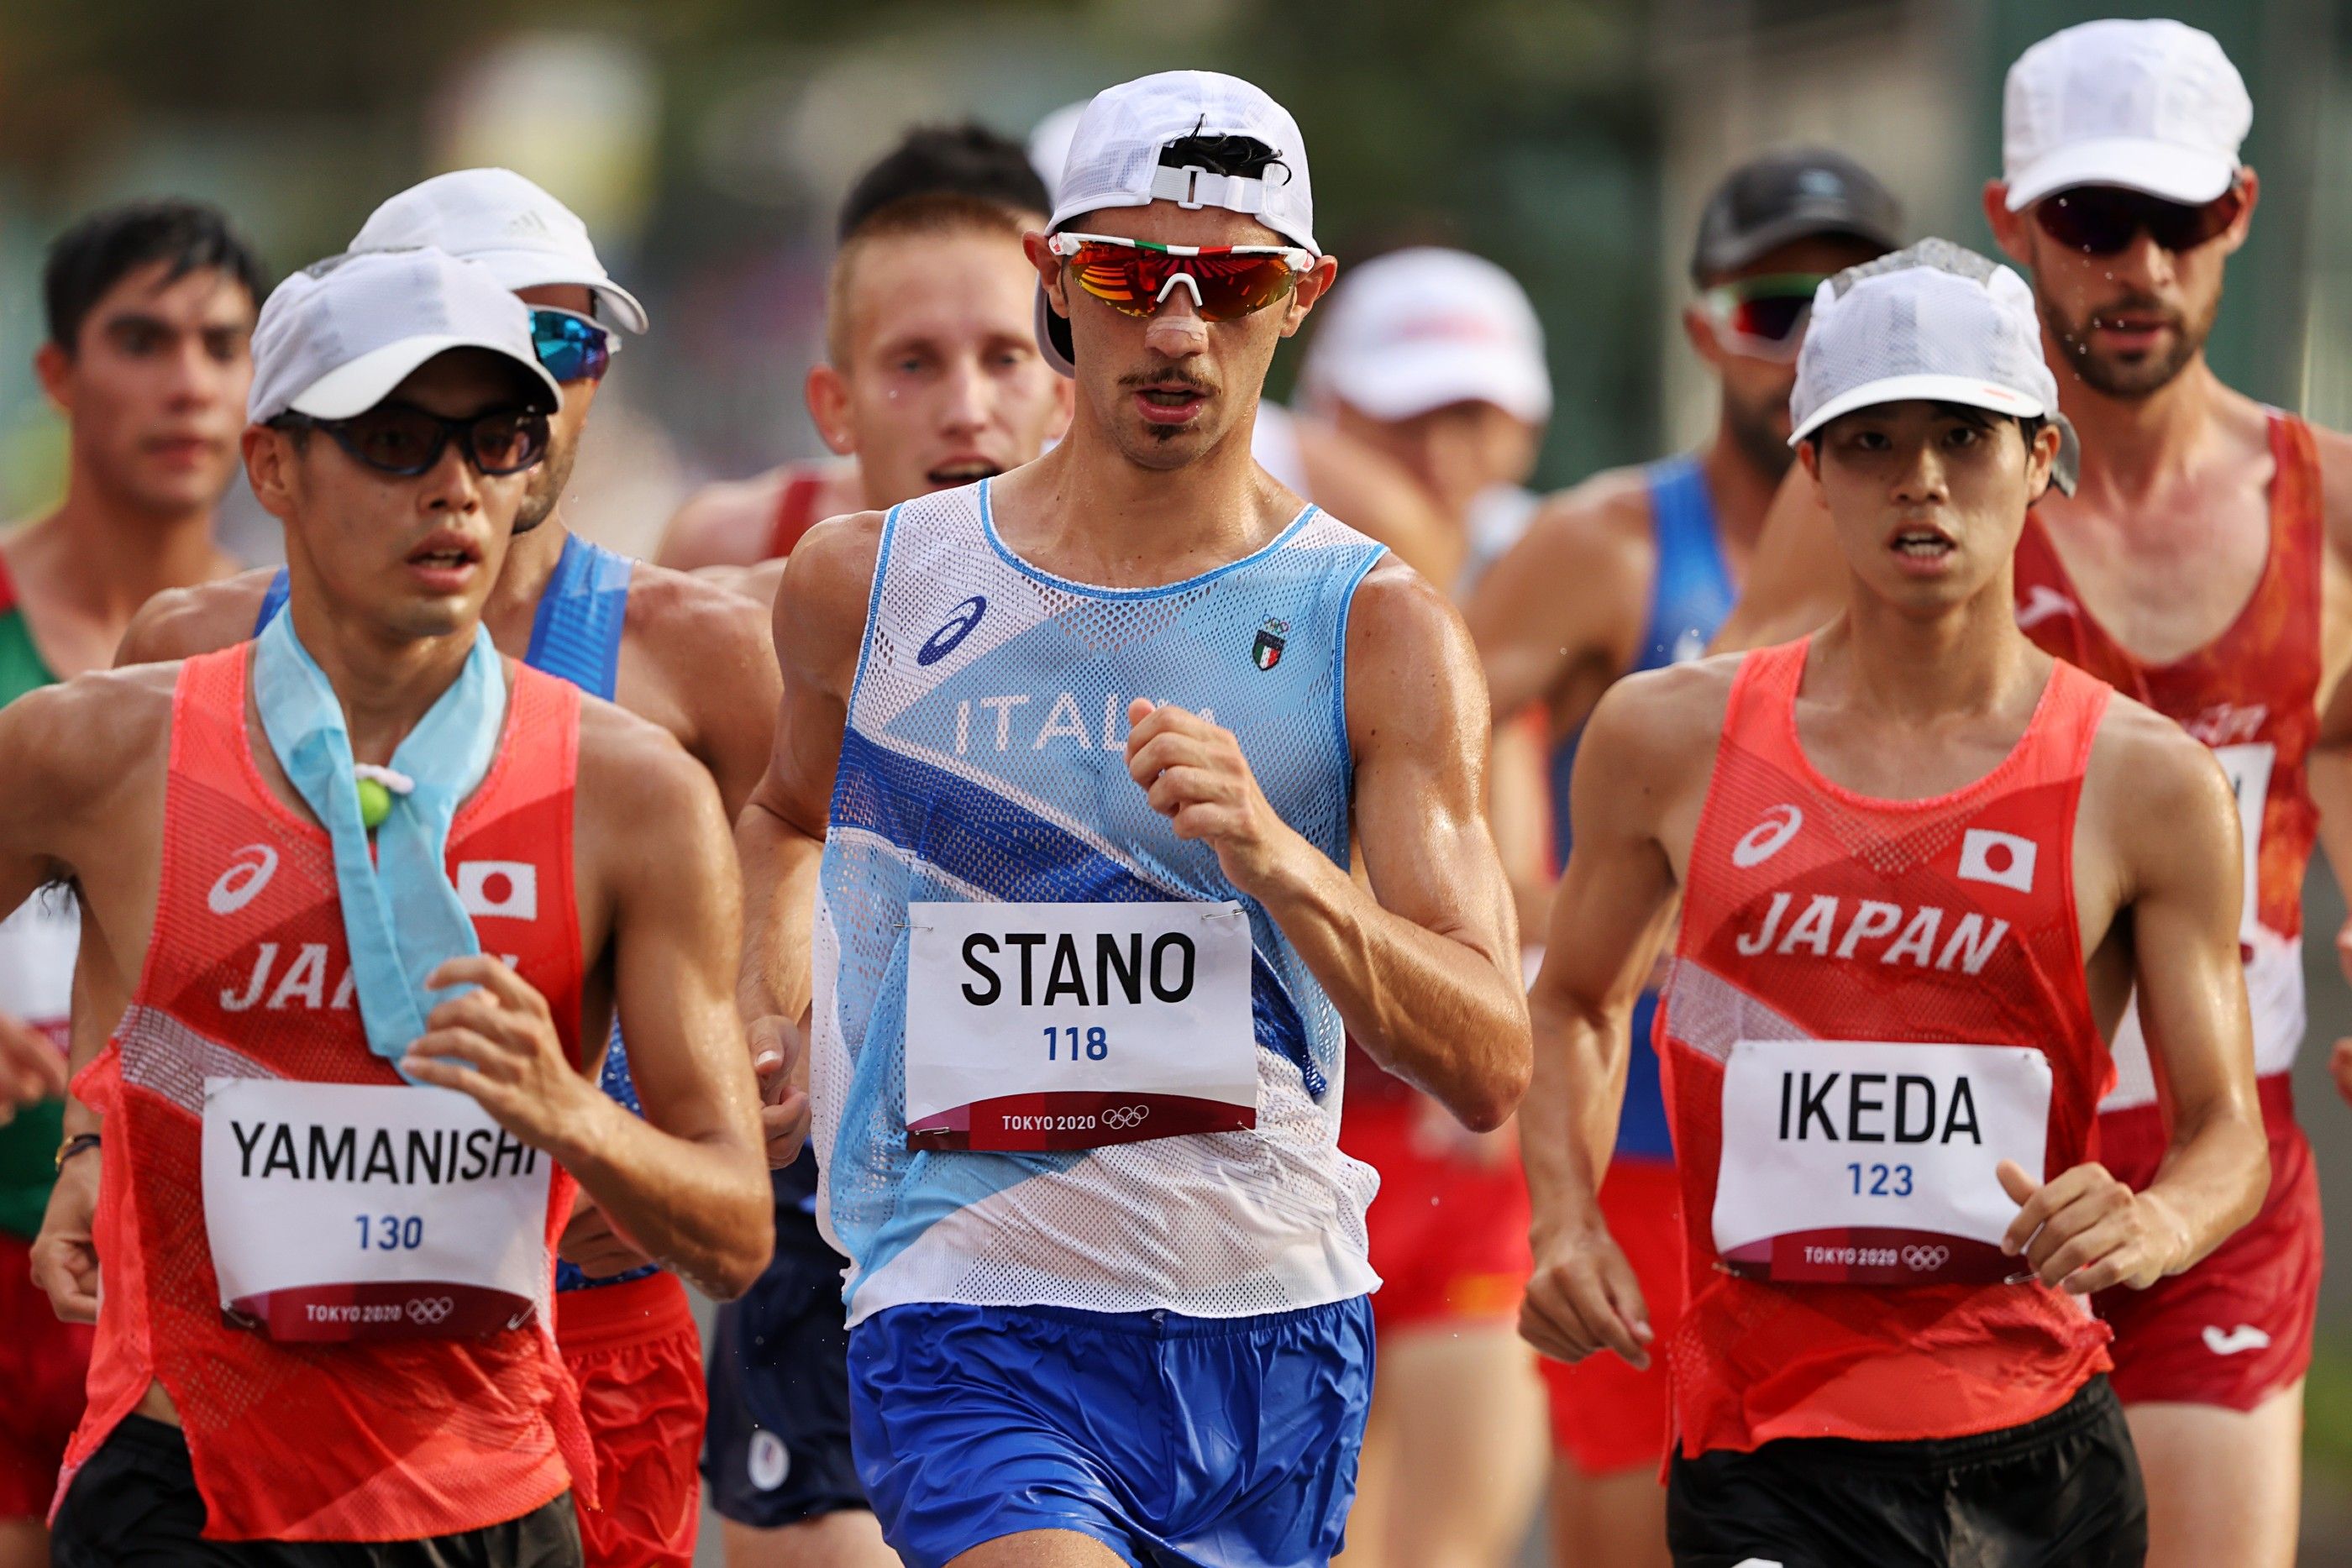 Massimo Stano on the way to Olympic 20km race walk gold in Sapporo